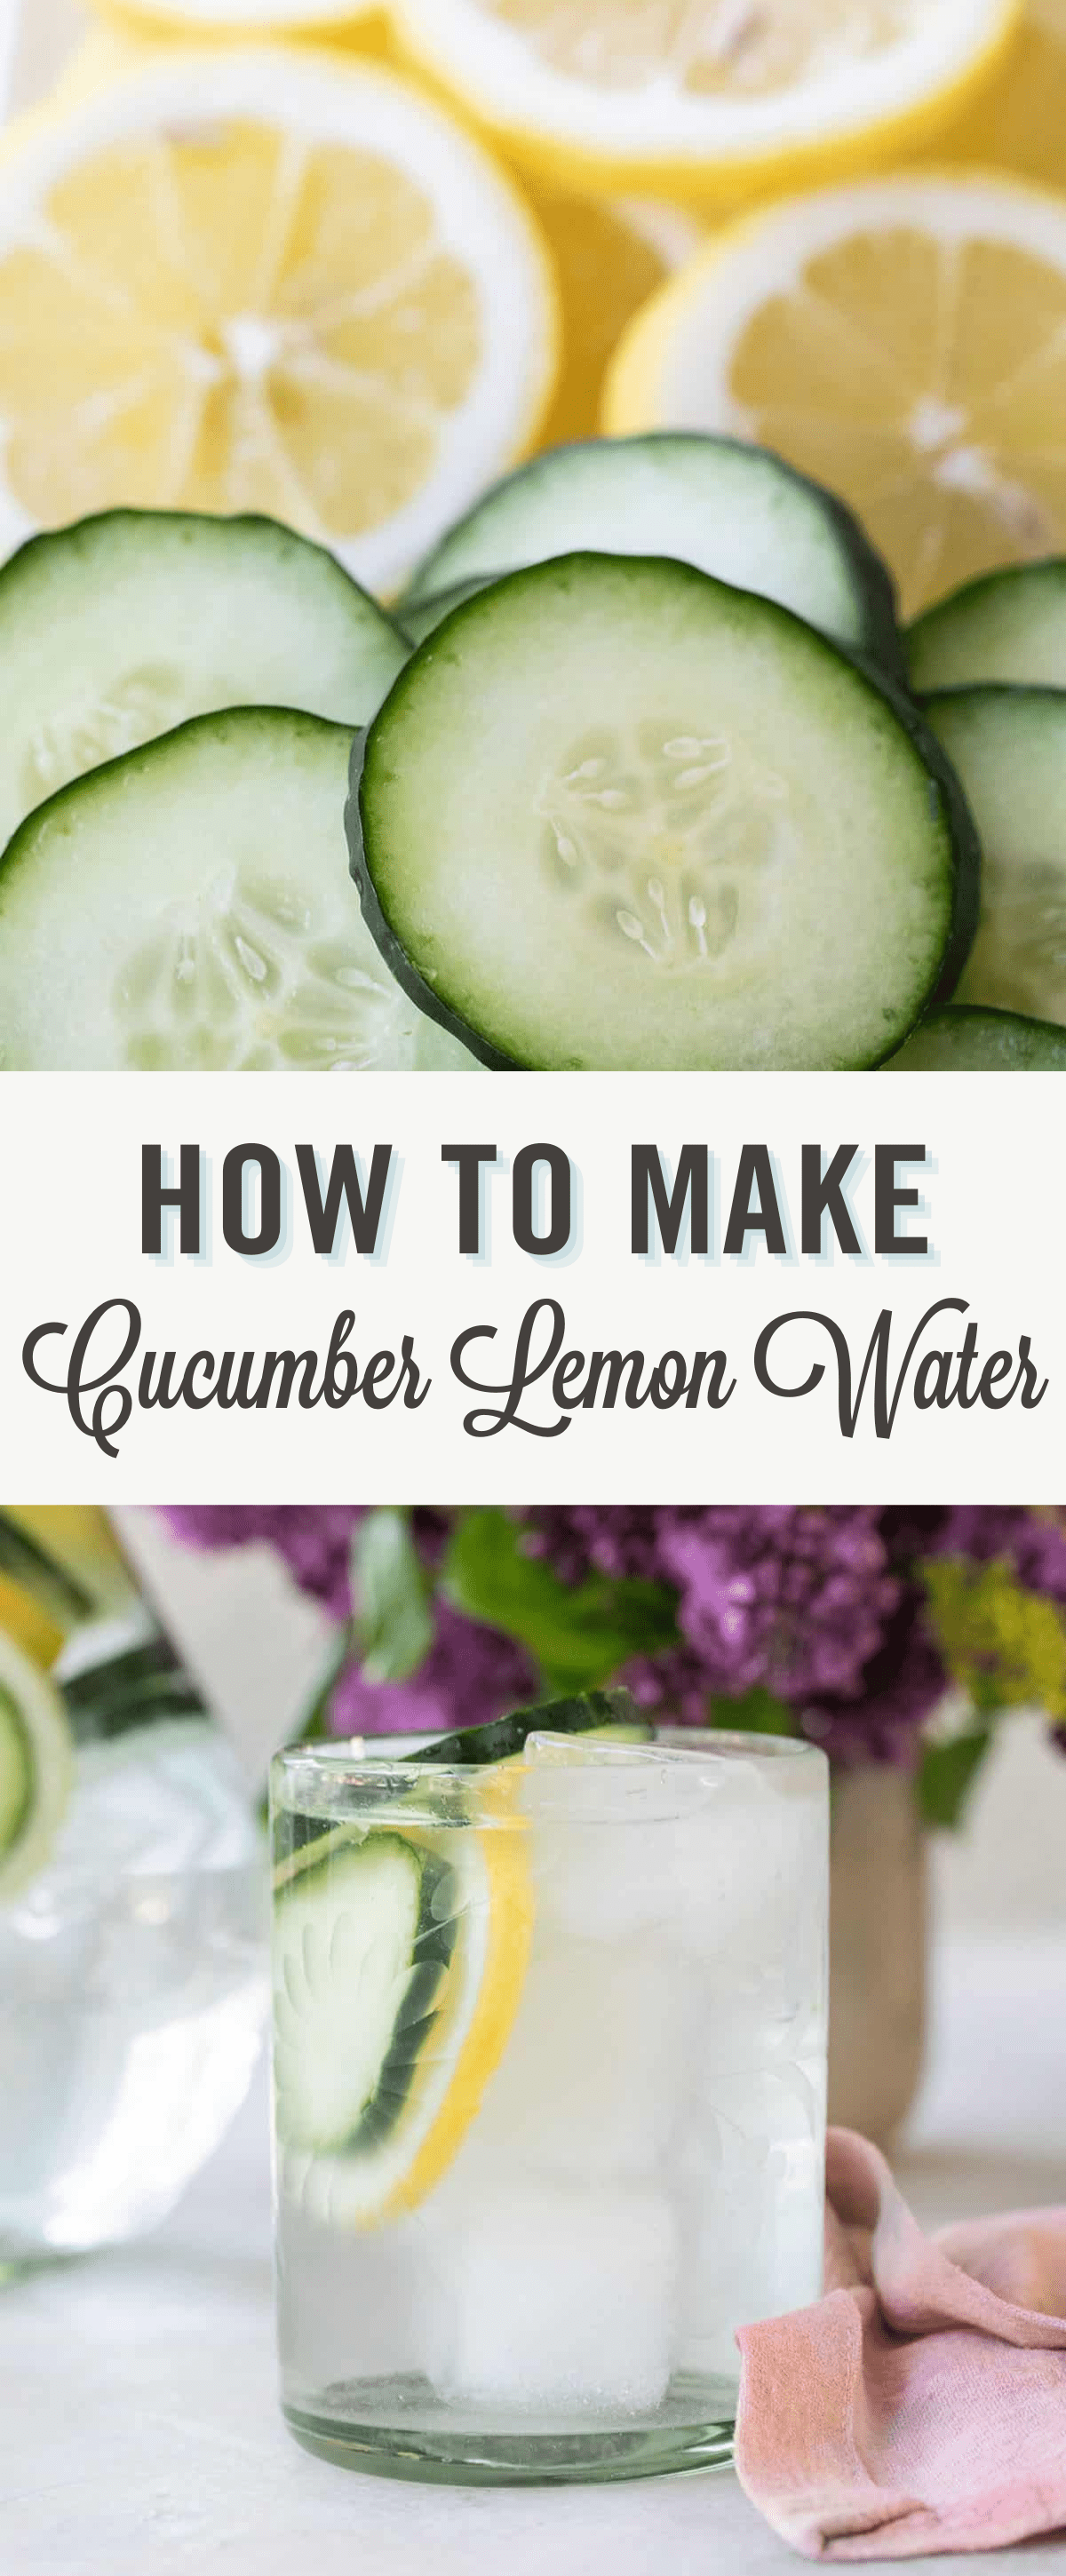 Cucumber lemon water with title text.